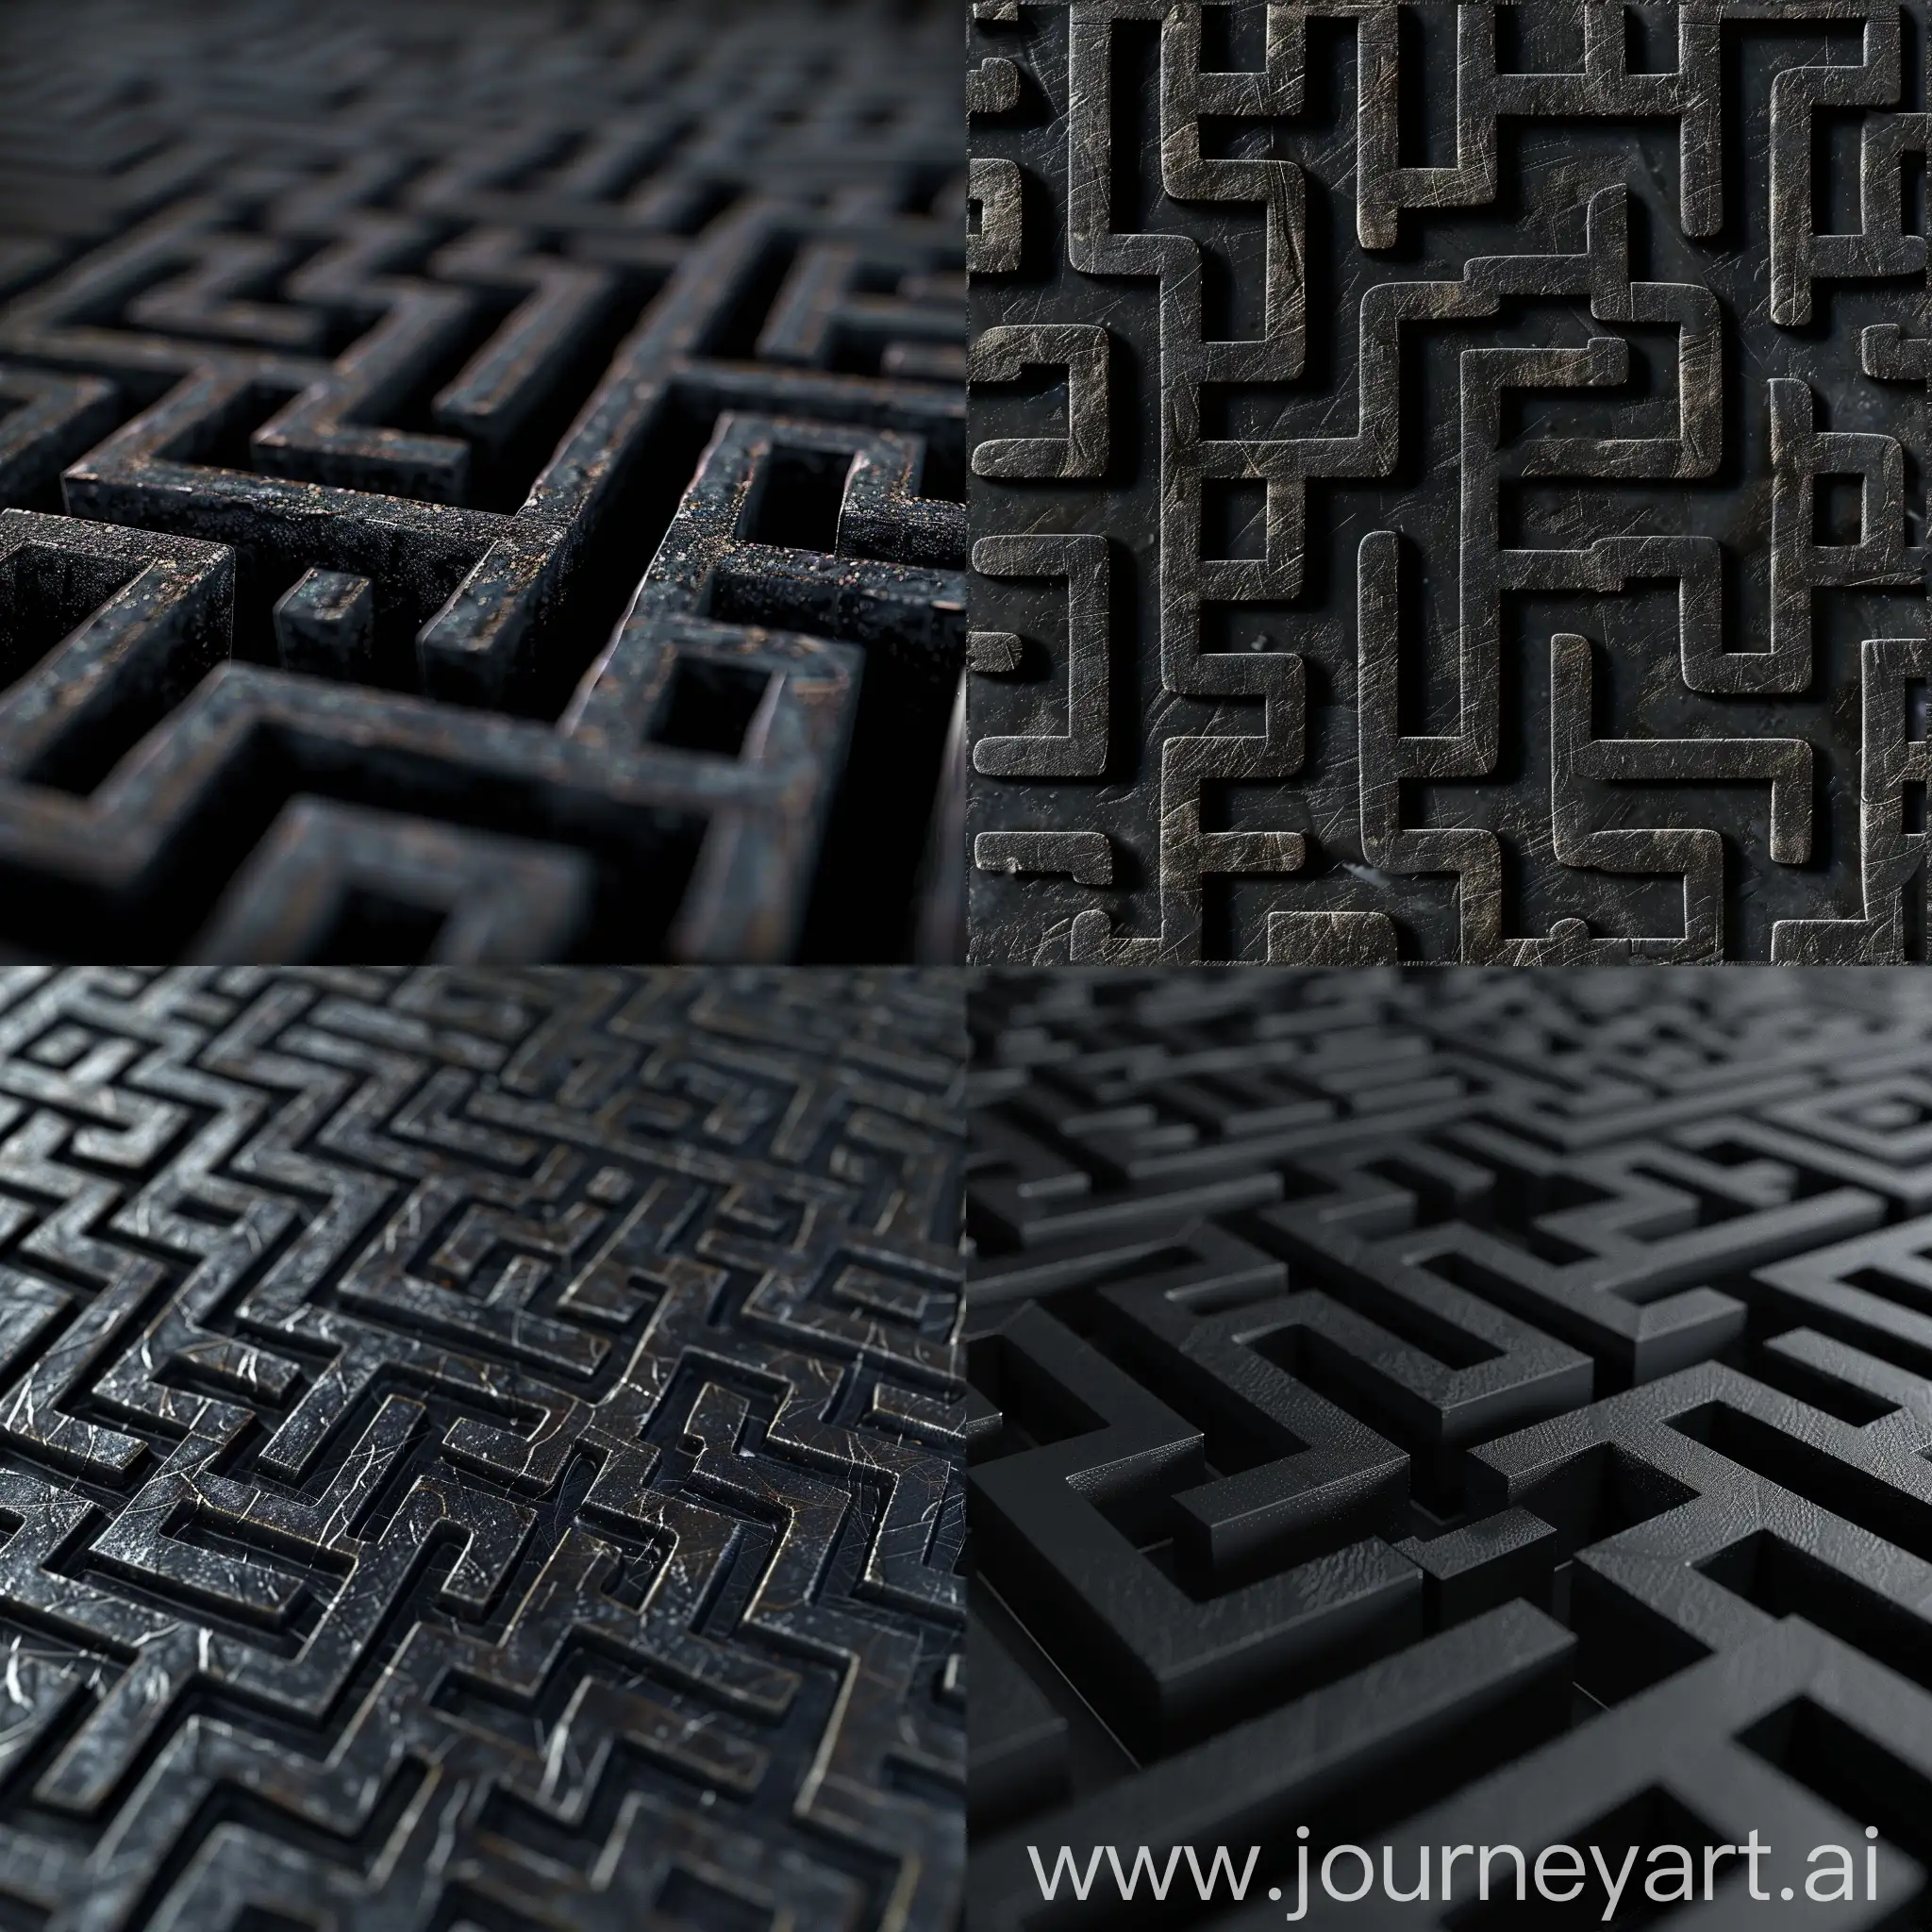 Black-Maze-in-a-Compact-Space